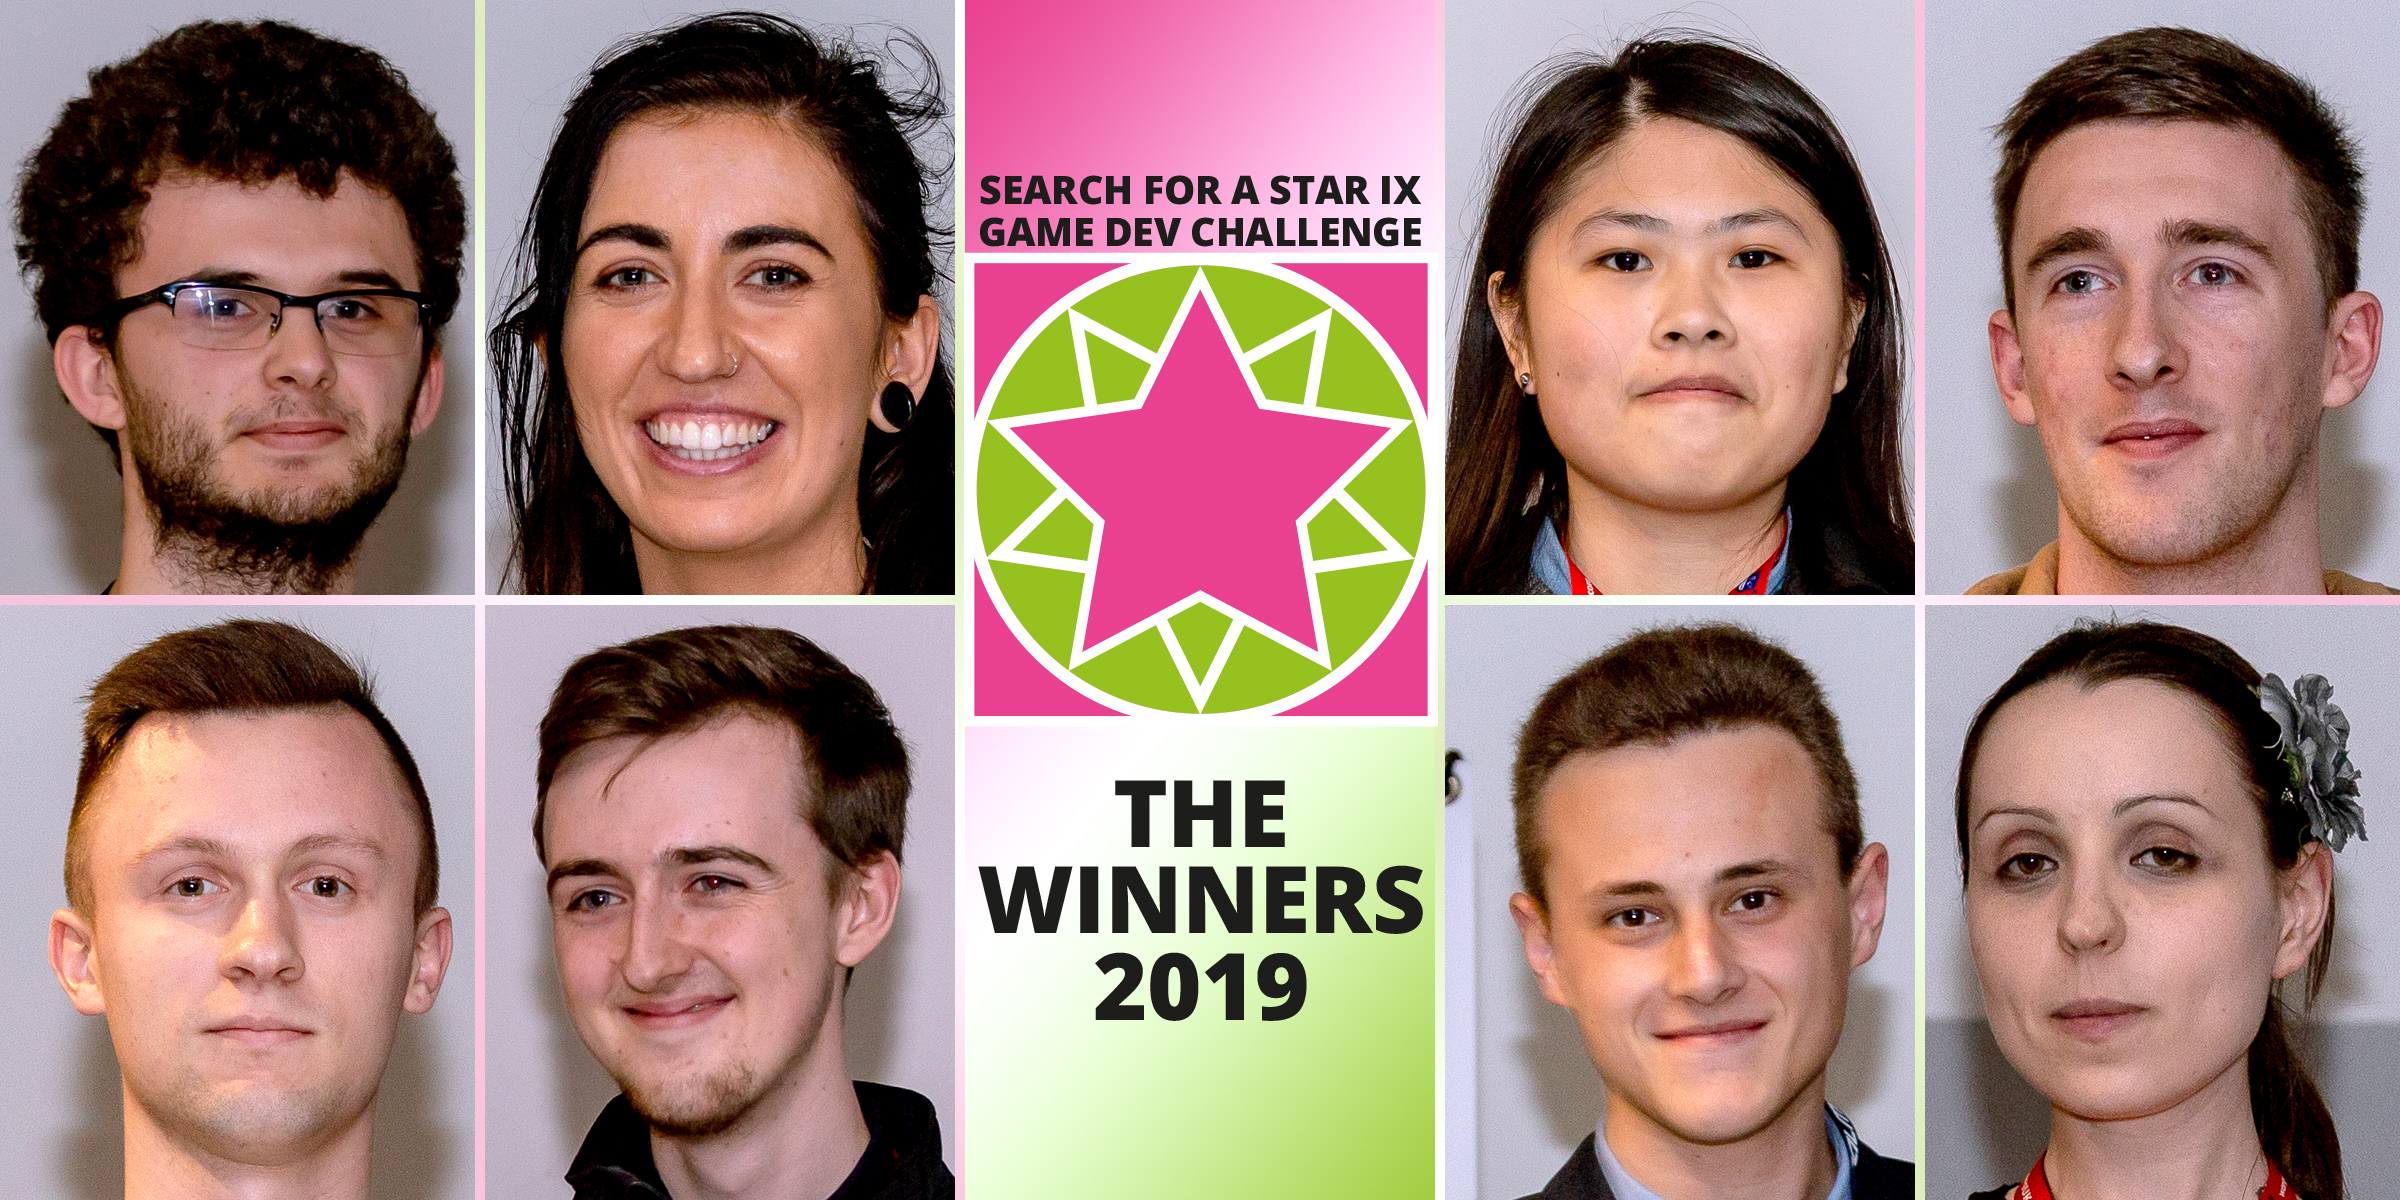 Search For A Star & Sumo Digital Rising Star: The 2019 Winners